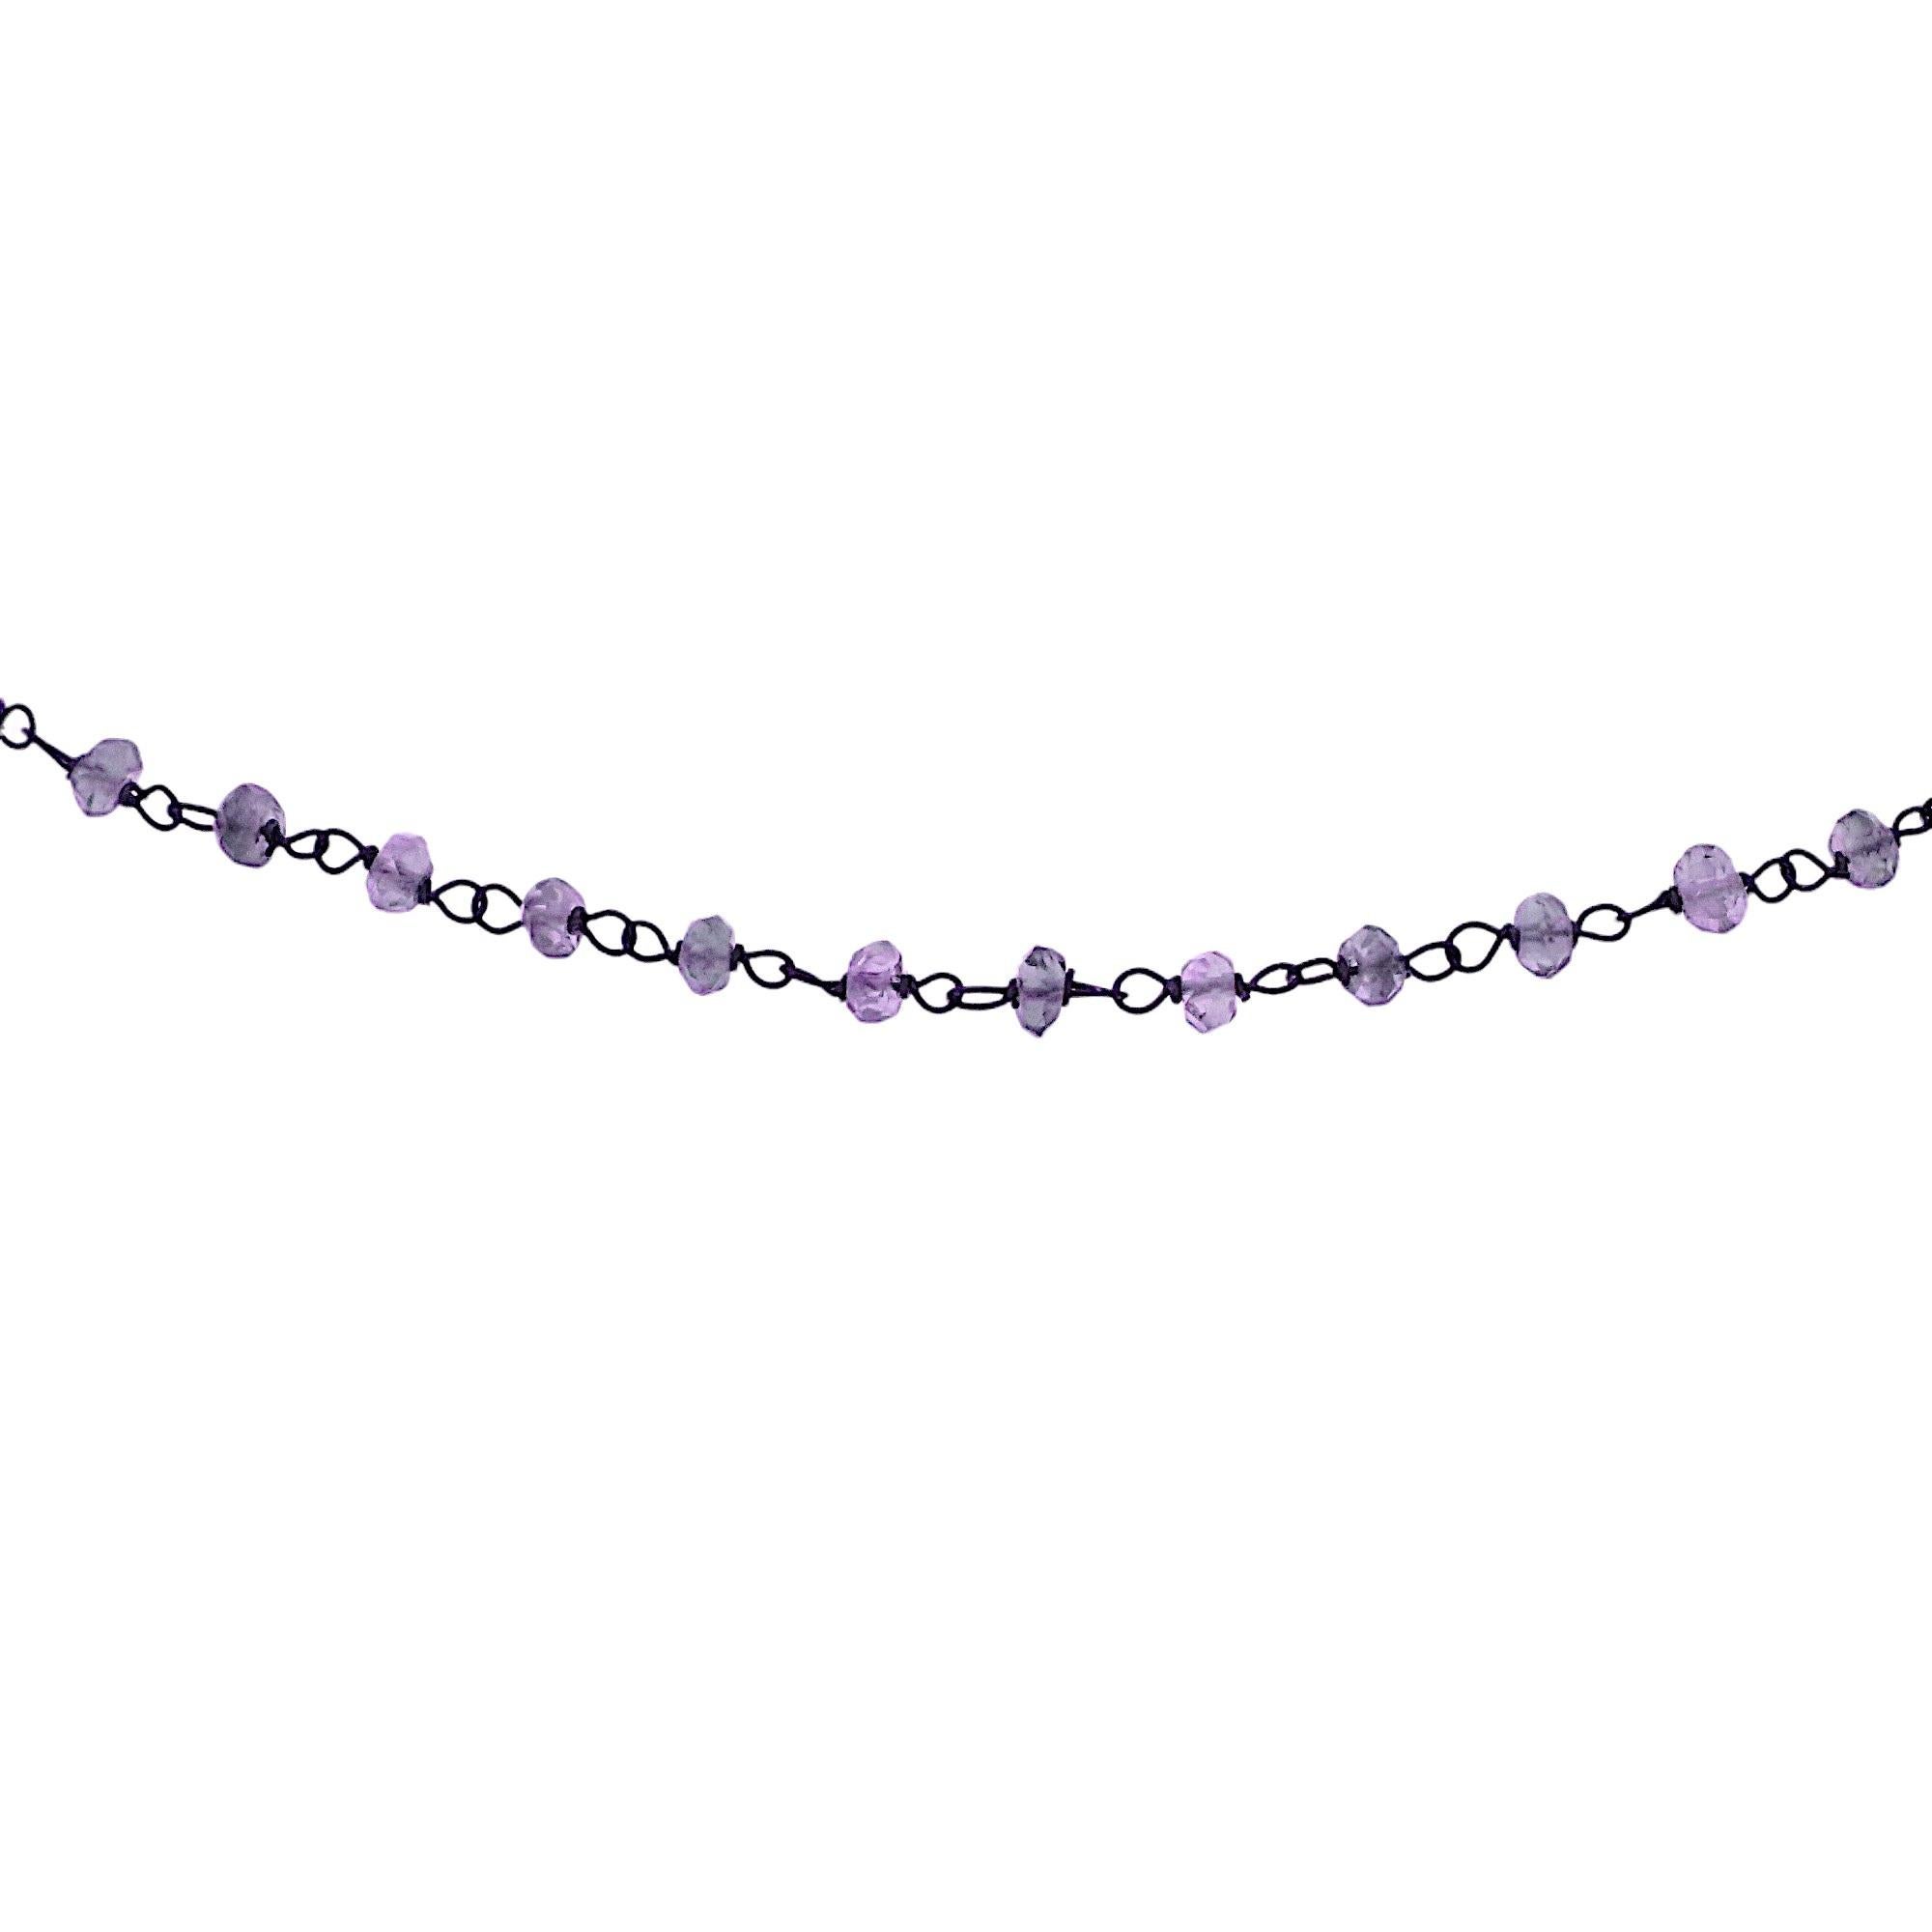 Necklace formed of small 3 mm / 0.118 inches iolite nuggets threaded into 18k white gold with black rhodium. The choker was handcrafted by Botta Gioielli in Milan, has the 750 mark of 18k gold and the 716MI mark of Botta Gioielli. The total length